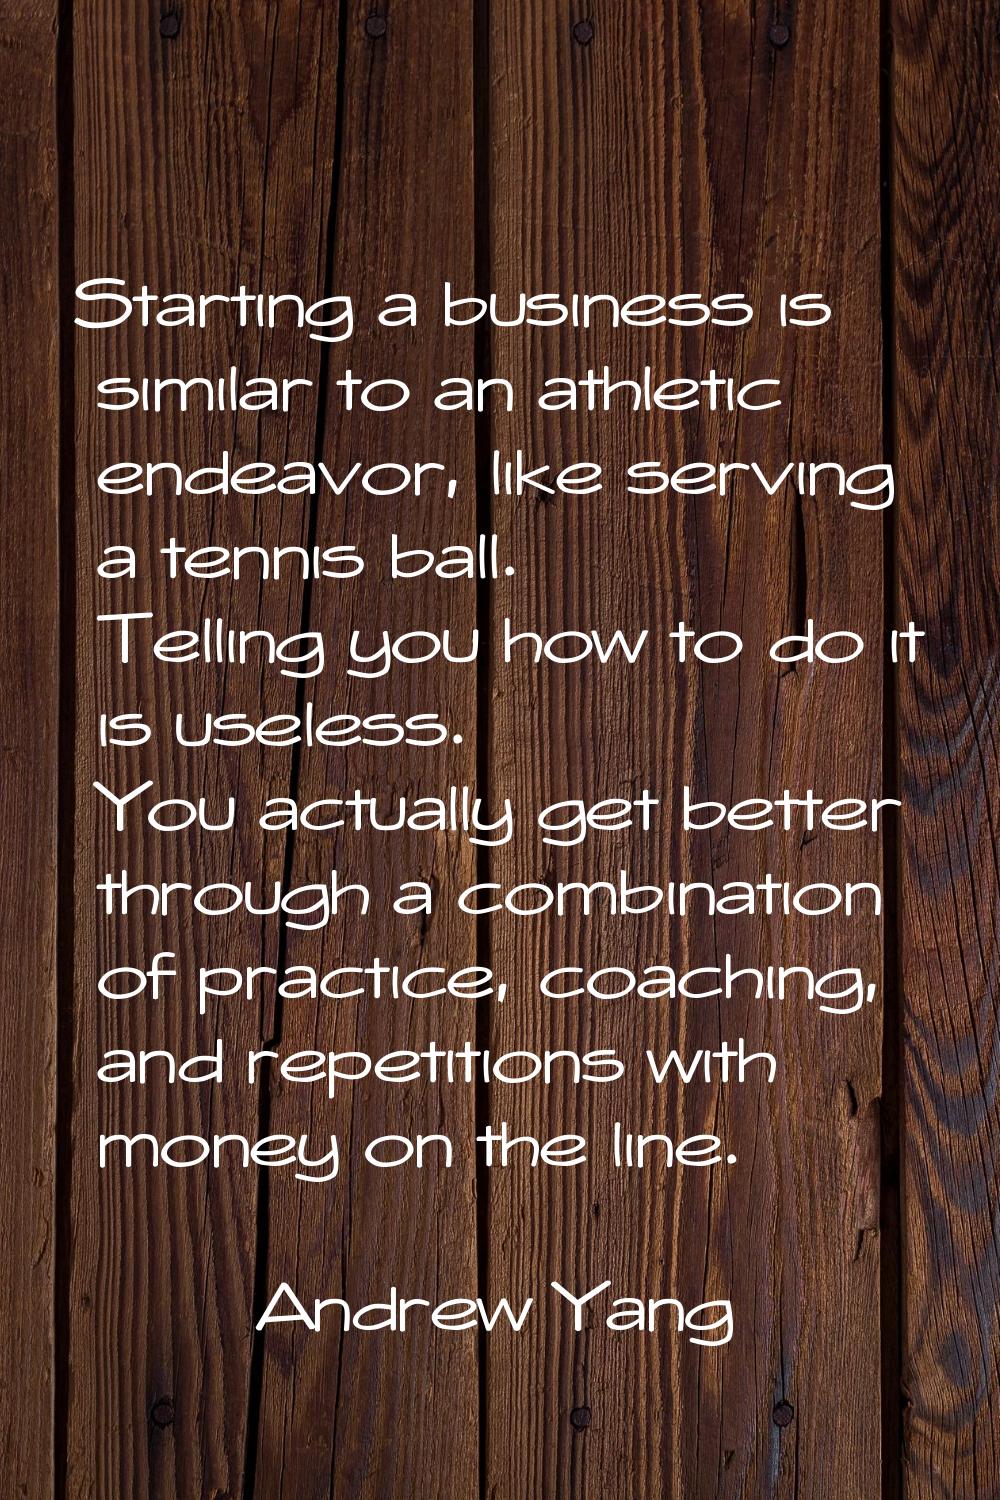 Starting a business is similar to an athletic endeavor, like serving a tennis ball. Telling you how